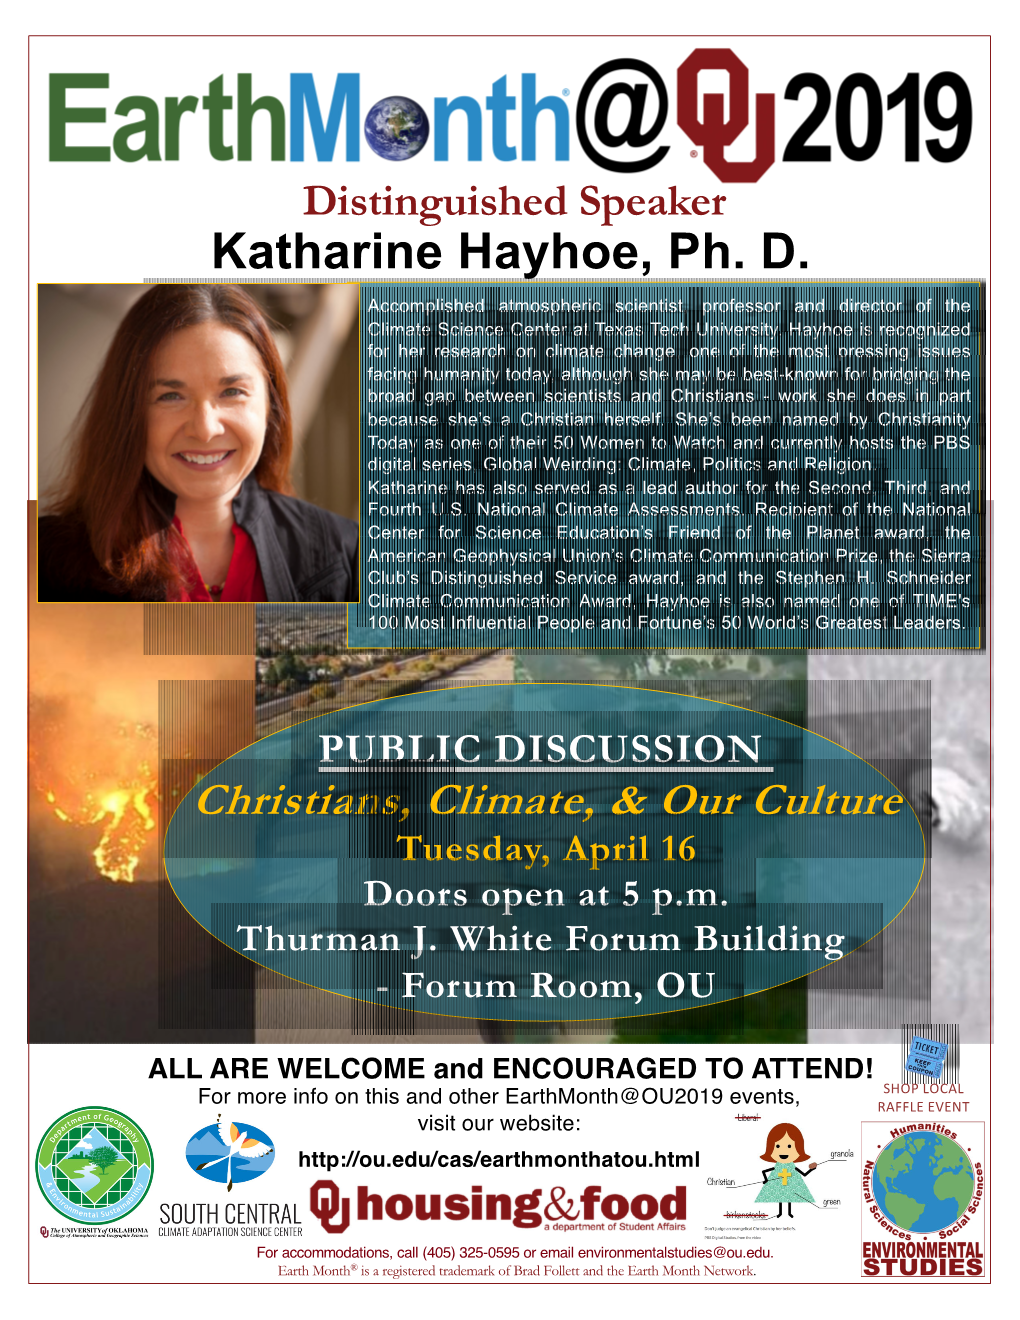 Earth Month at OU 2019 – Dr. Katharine Hayhoe